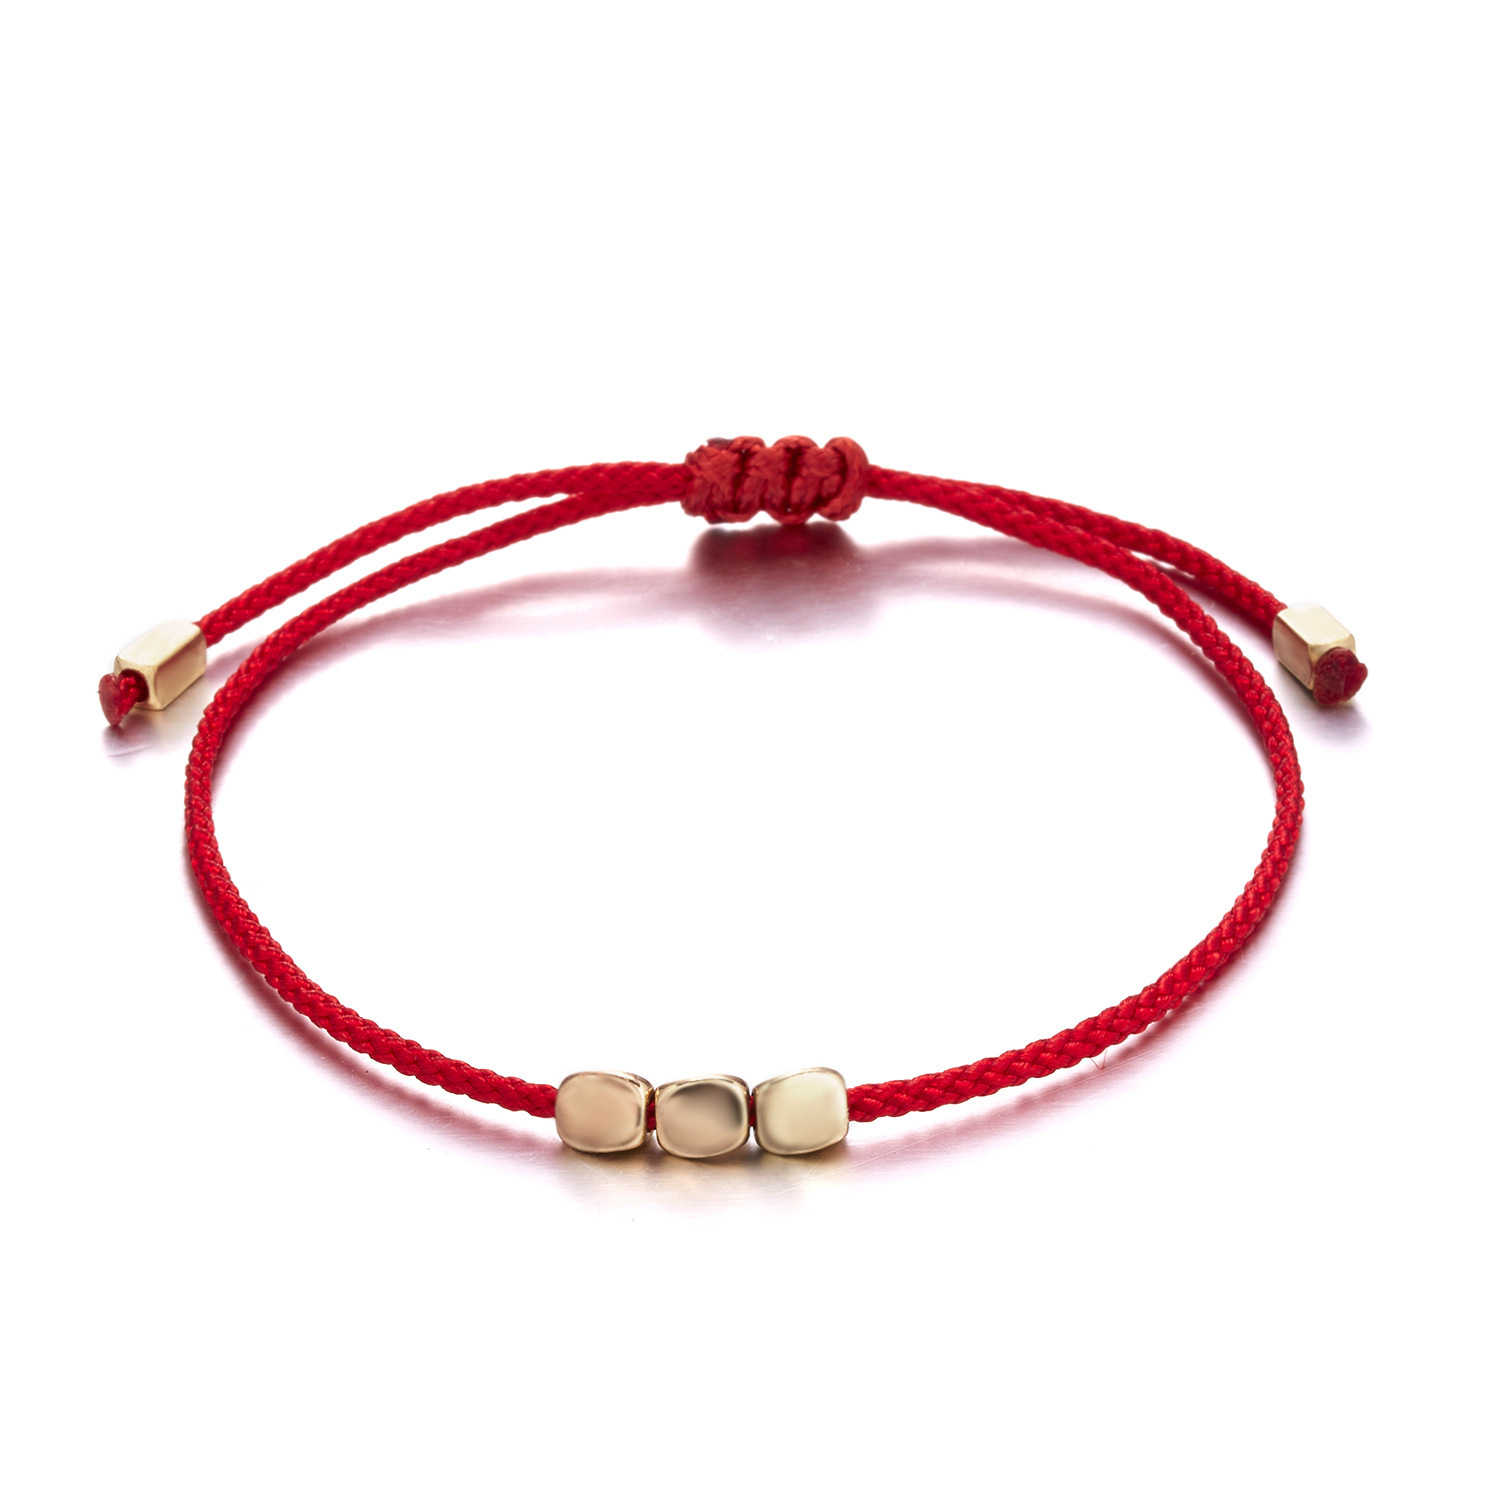 2:3 red strings with copper beads